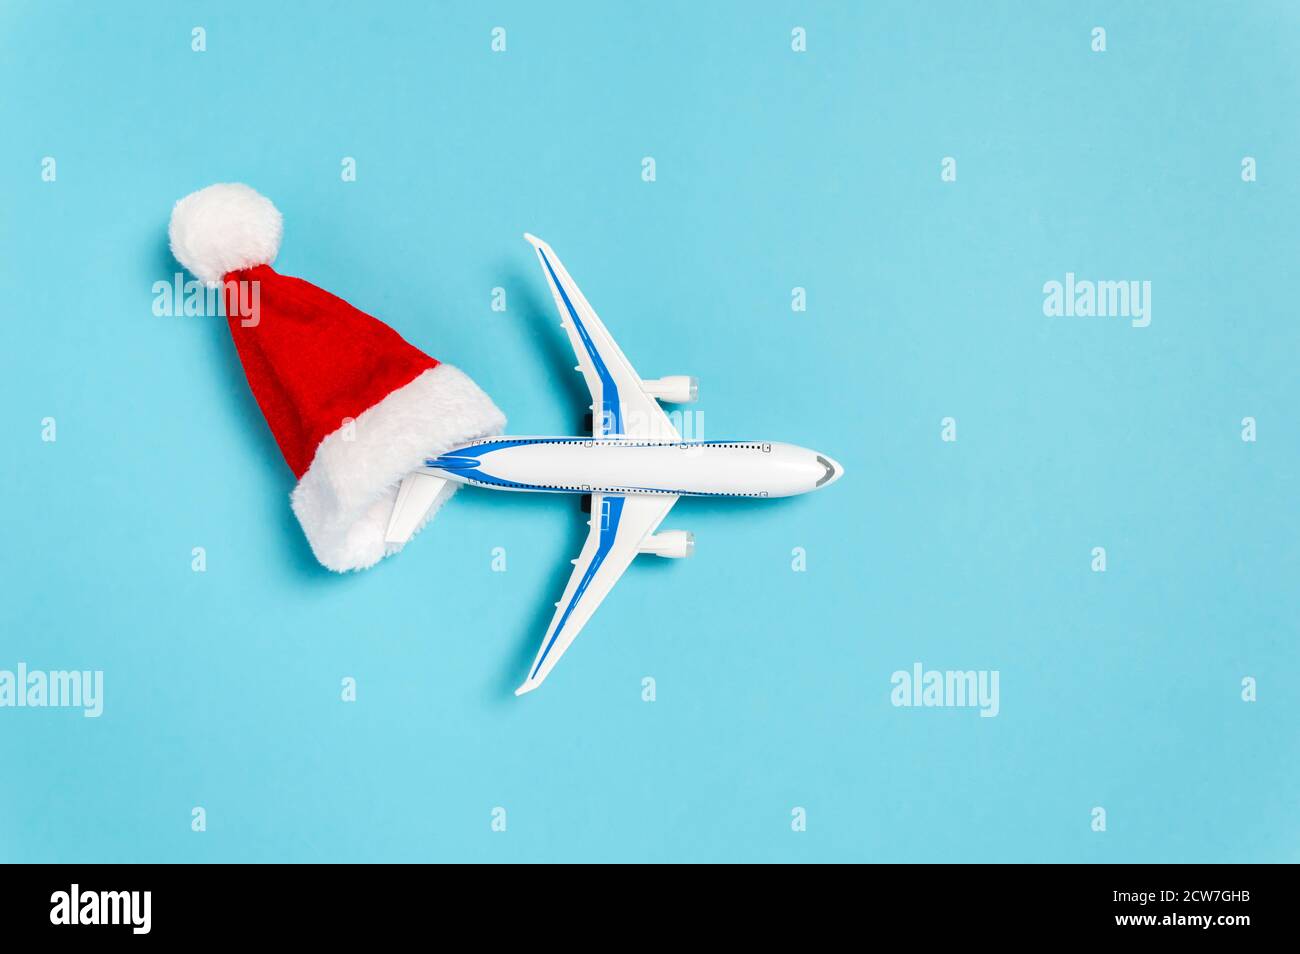 Christmas holidays travel concept. White airplane flying out of red Santa Clause hat on blue background. Flat lay style minimal composition for travel Stock Photo